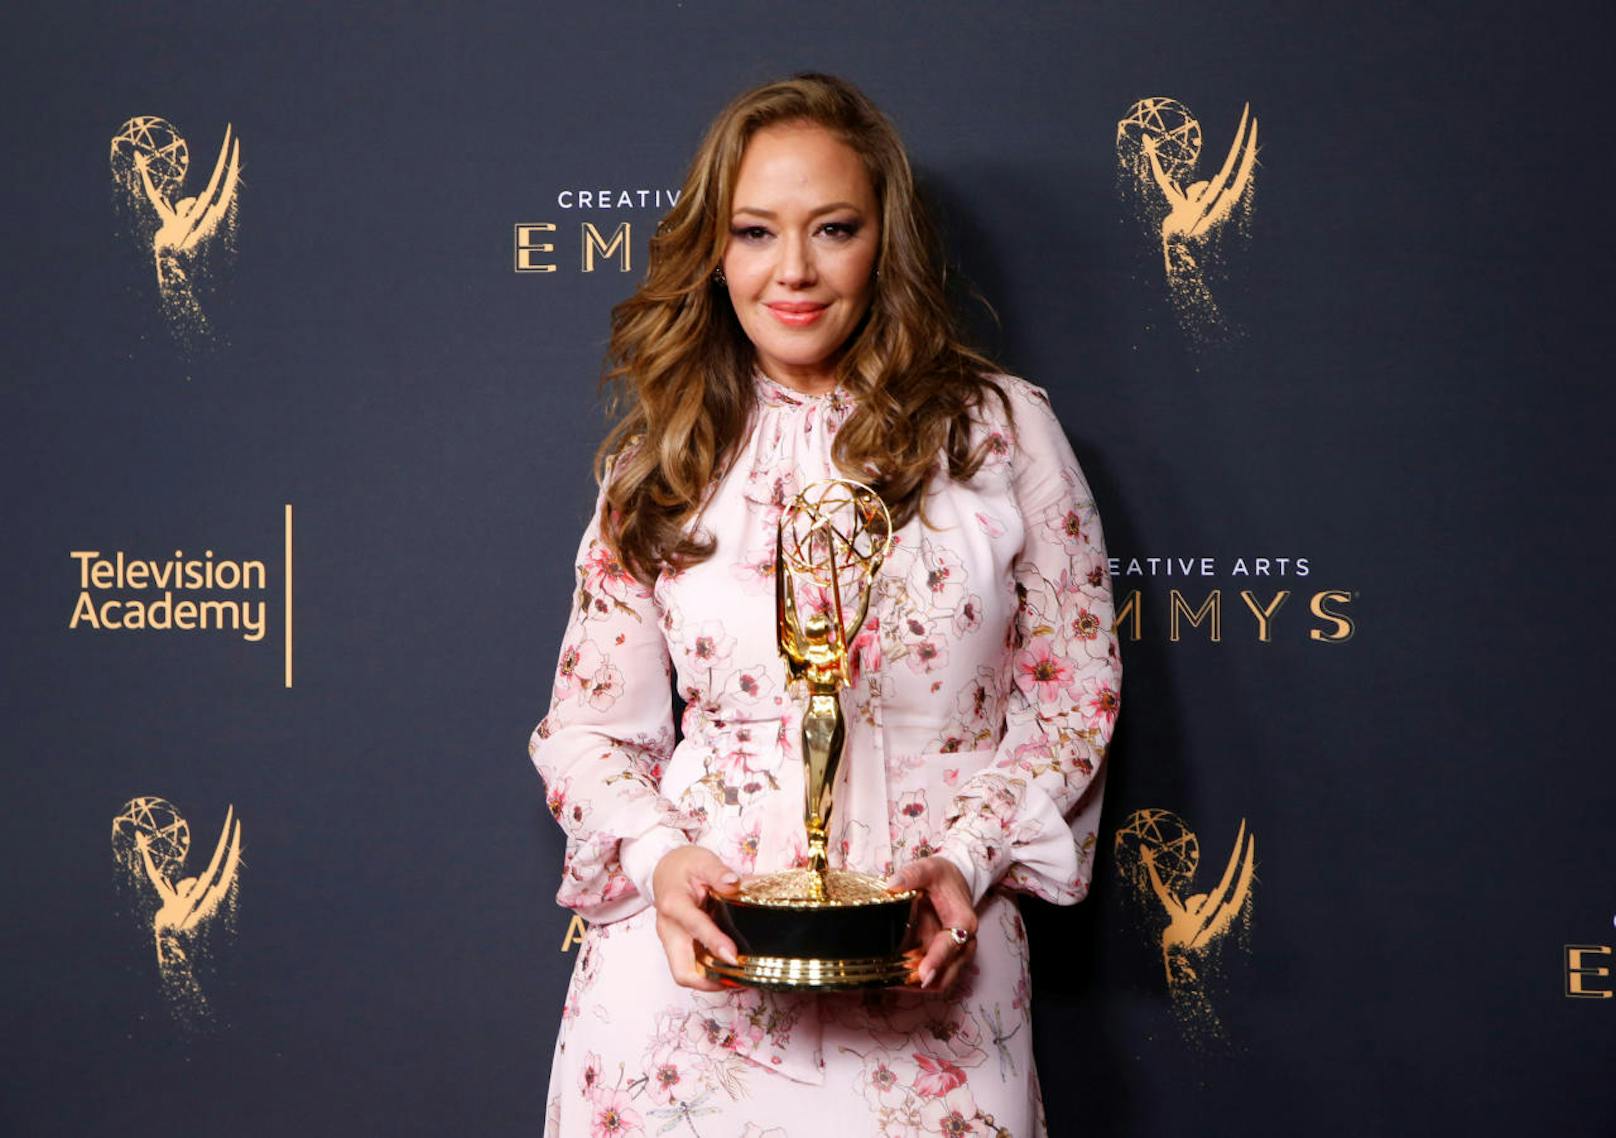 Leah Remini mit ihrem Emmy für Outstanding Informational Series Or Special ("Leah Remini: Scientology And The Aftermath") (Bild: Danny Moloshok)